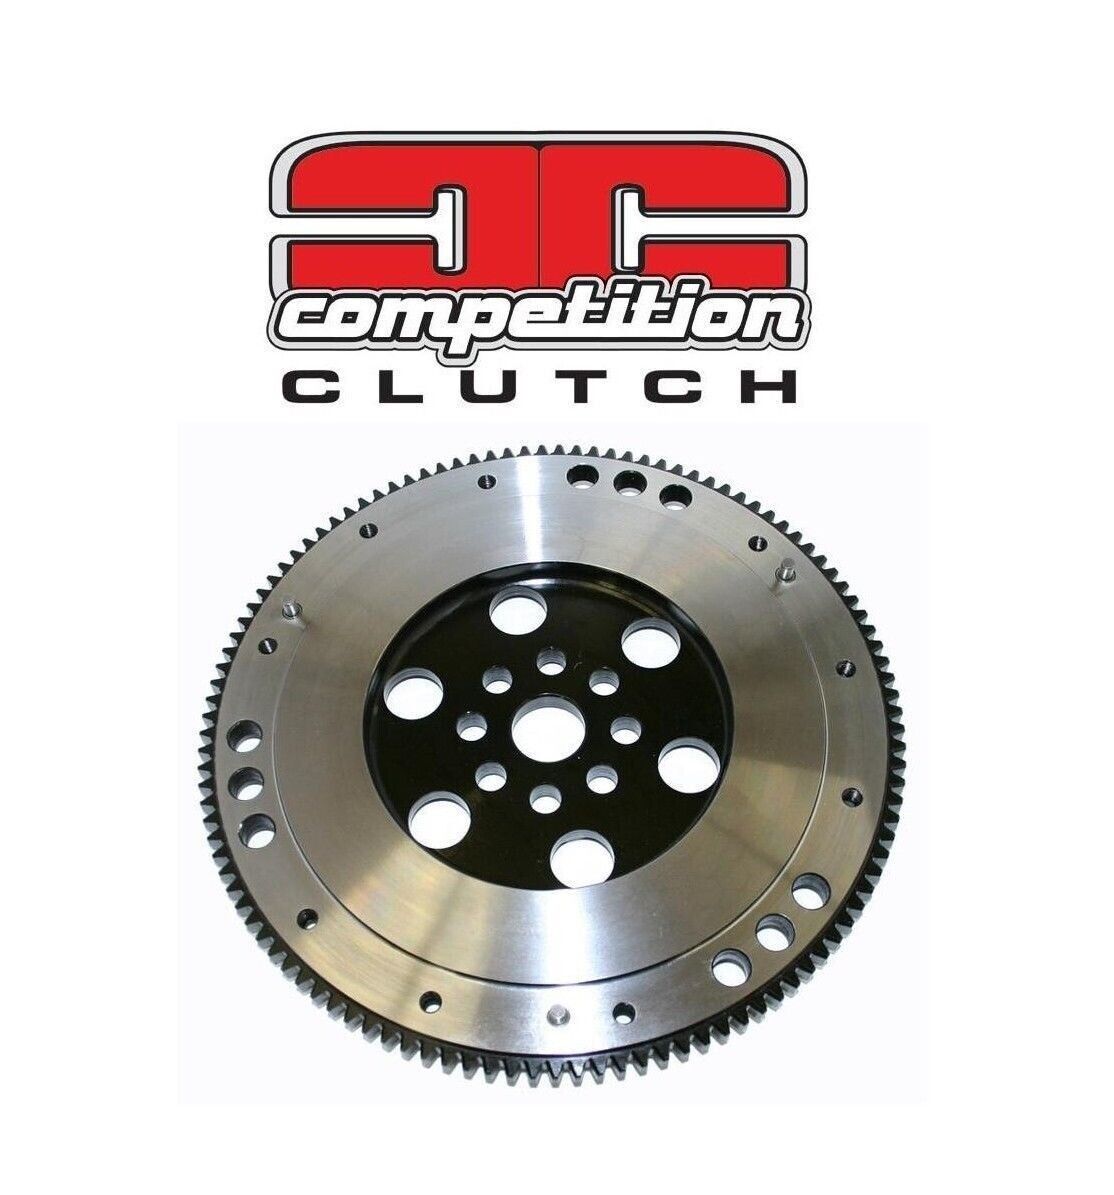 COMPETITION CLUTCH LIGHTWEIGHT FLYWHEEL 11 LBS 08-15 FOR LANCER EVO X 10